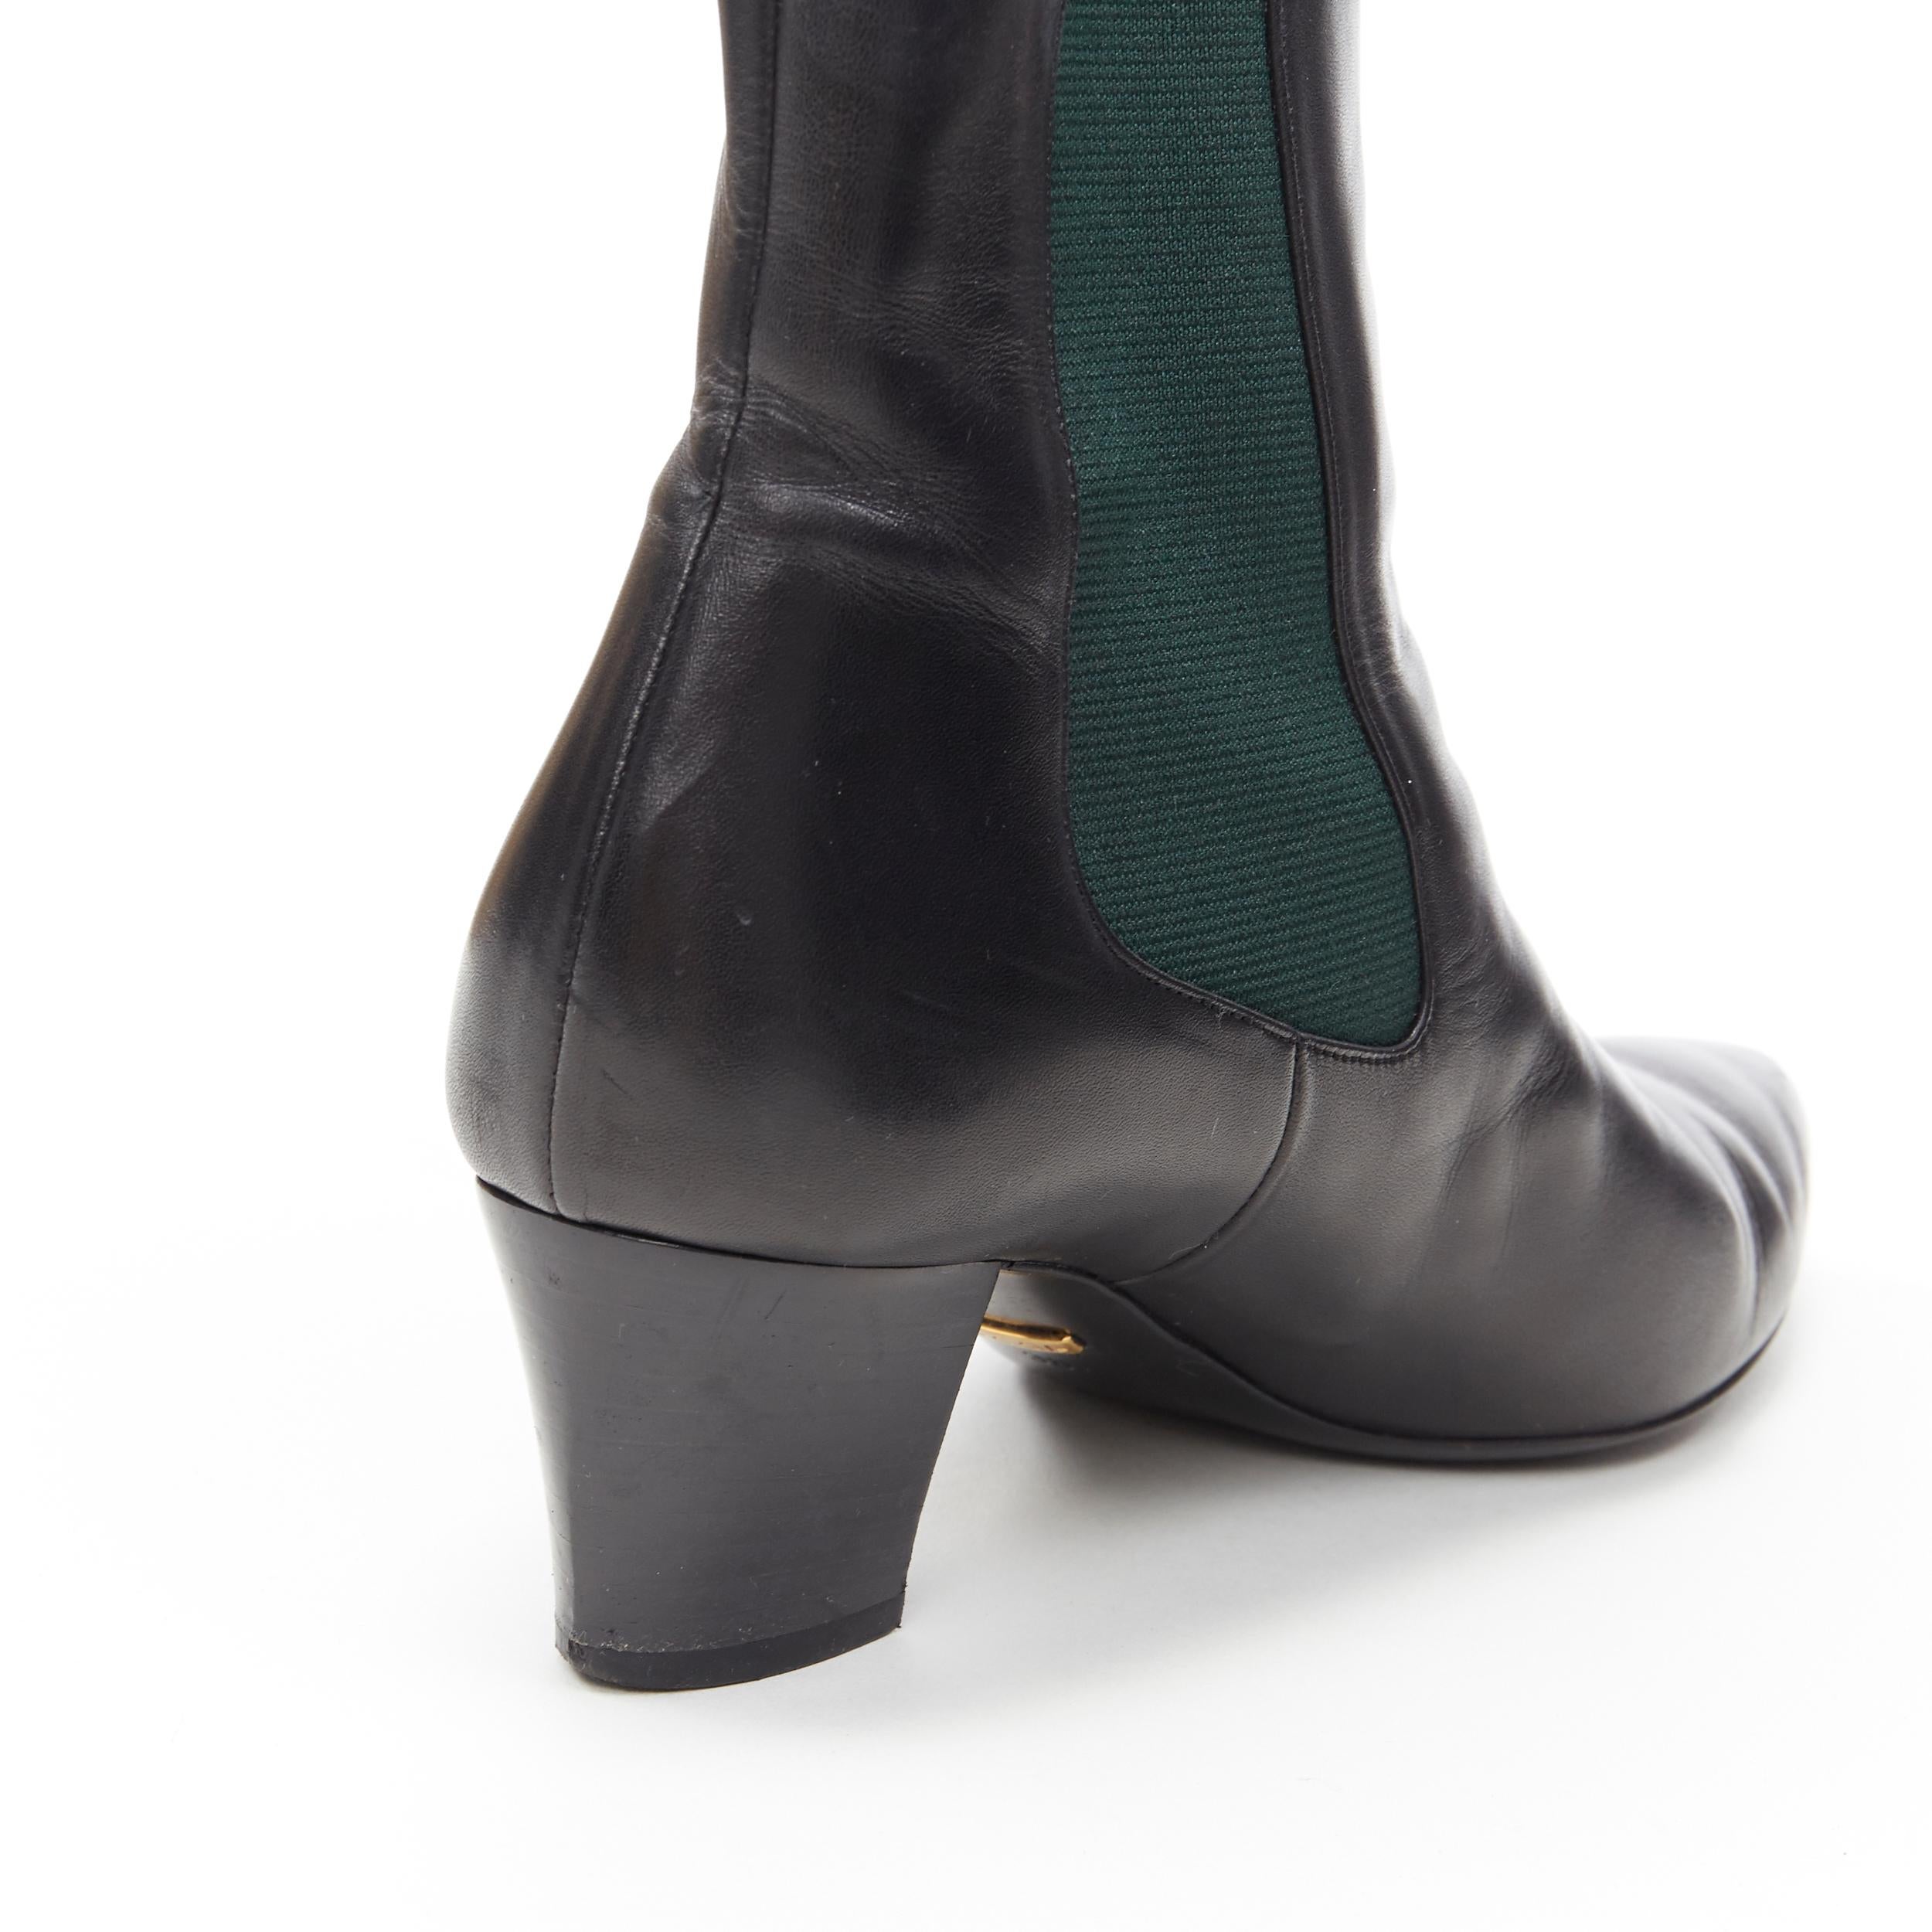 GUCCI black leather green elastic gusset pointed toe block heel ankle boot EU38 3